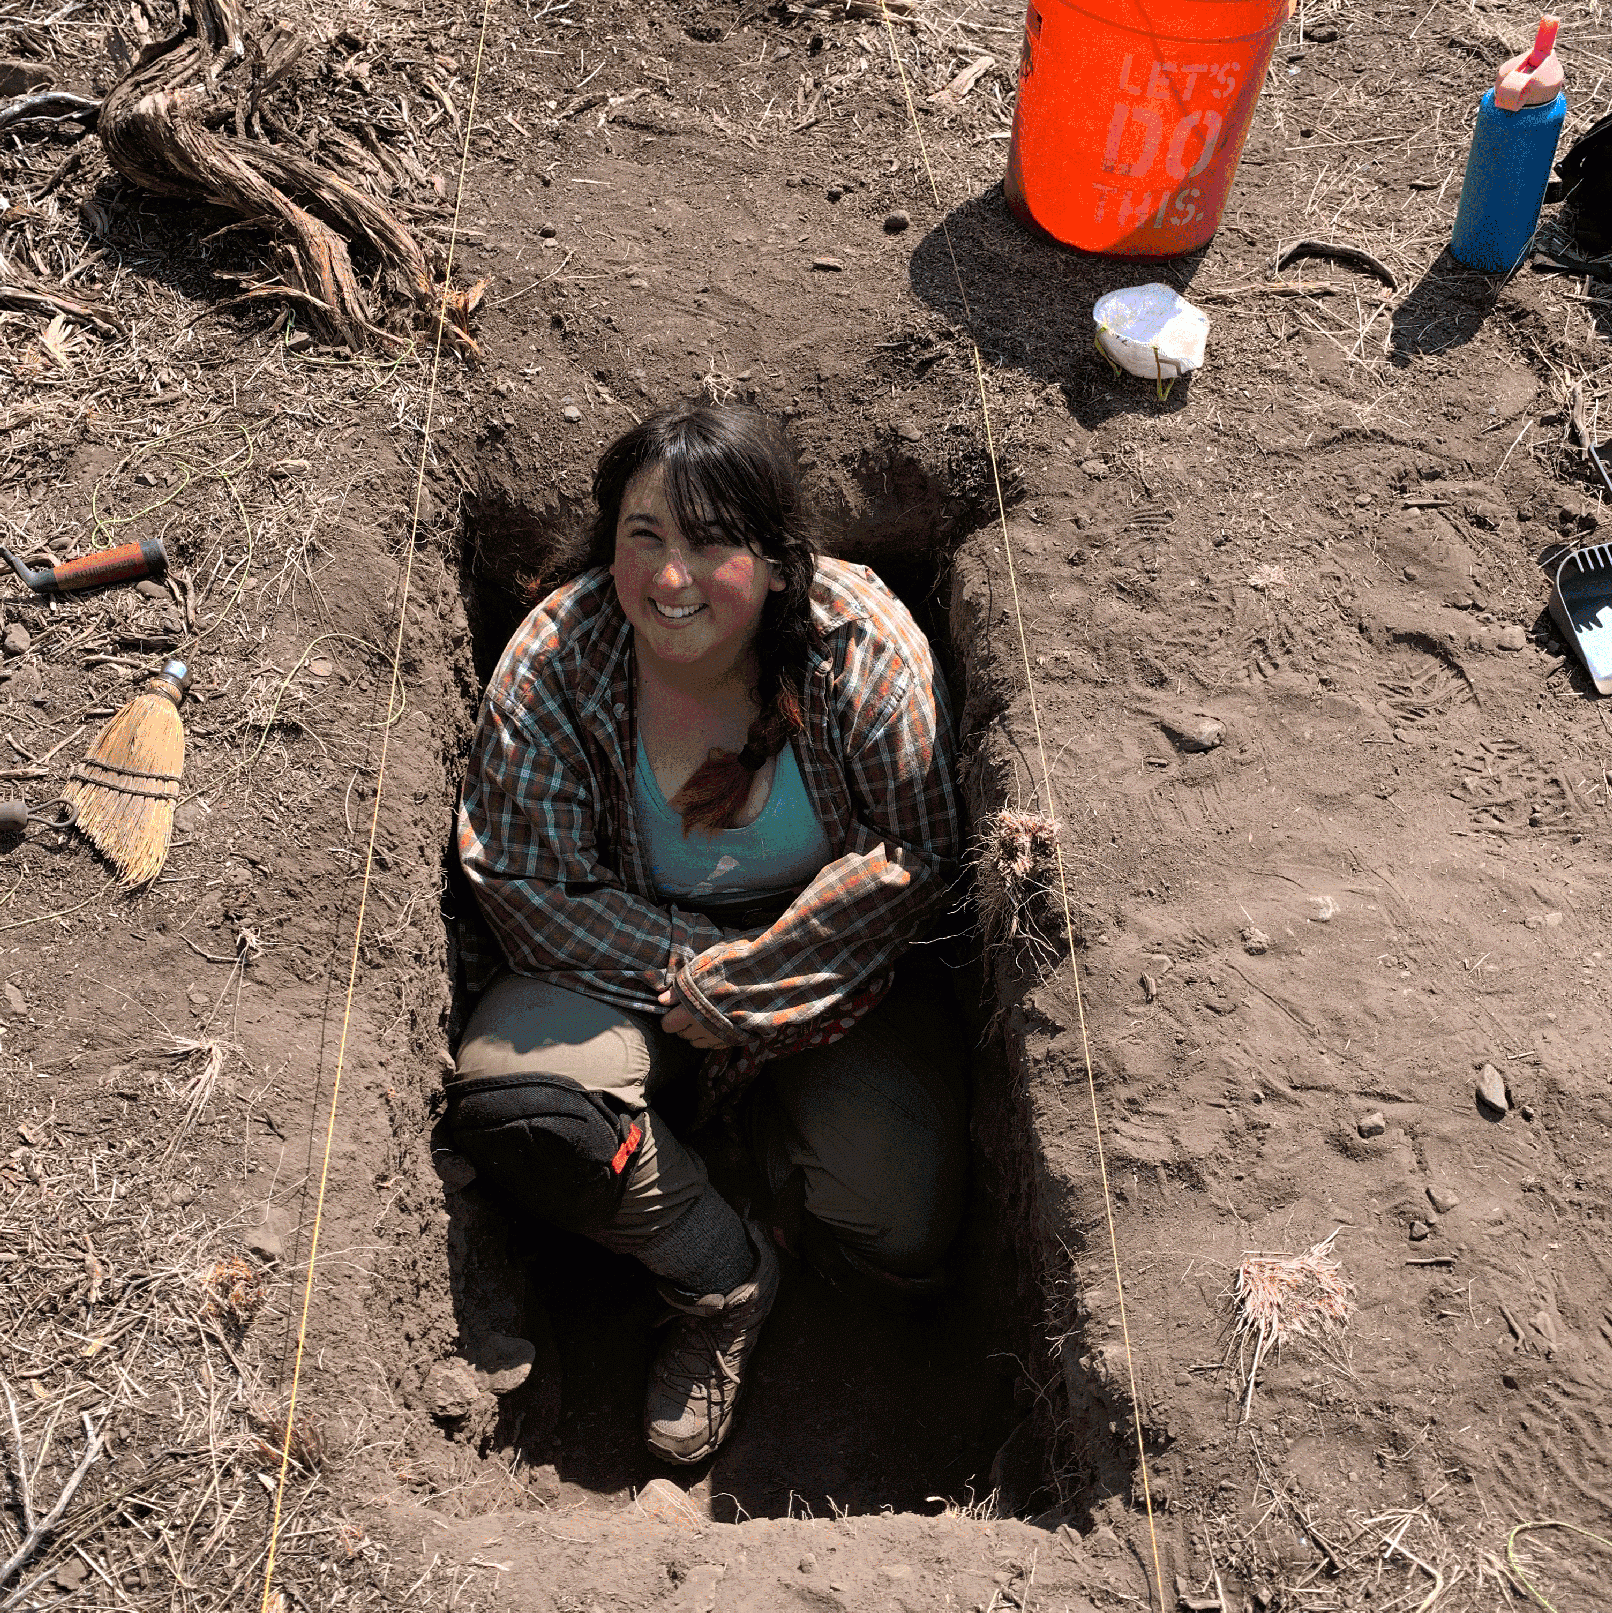 Andrea Levinson, recipient of the 2022 Sherri Gust Memorial Scholarship, inside a small excavated space.